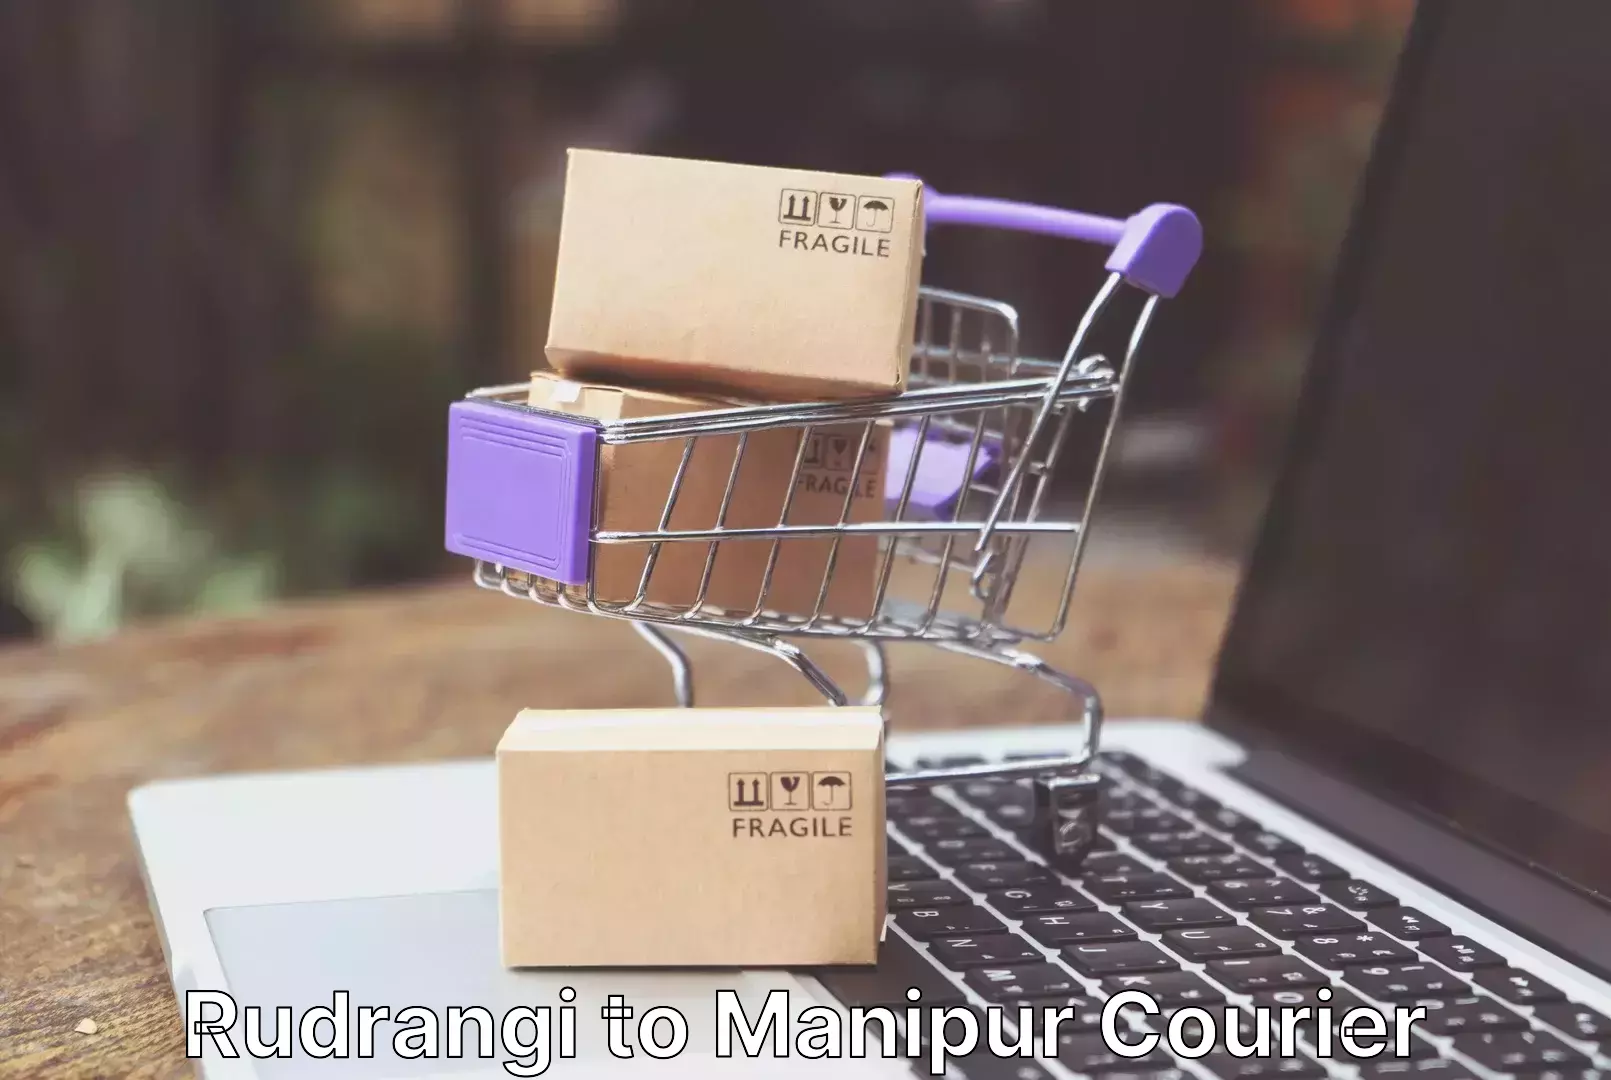 Efficient moving company Rudrangi to Manipur